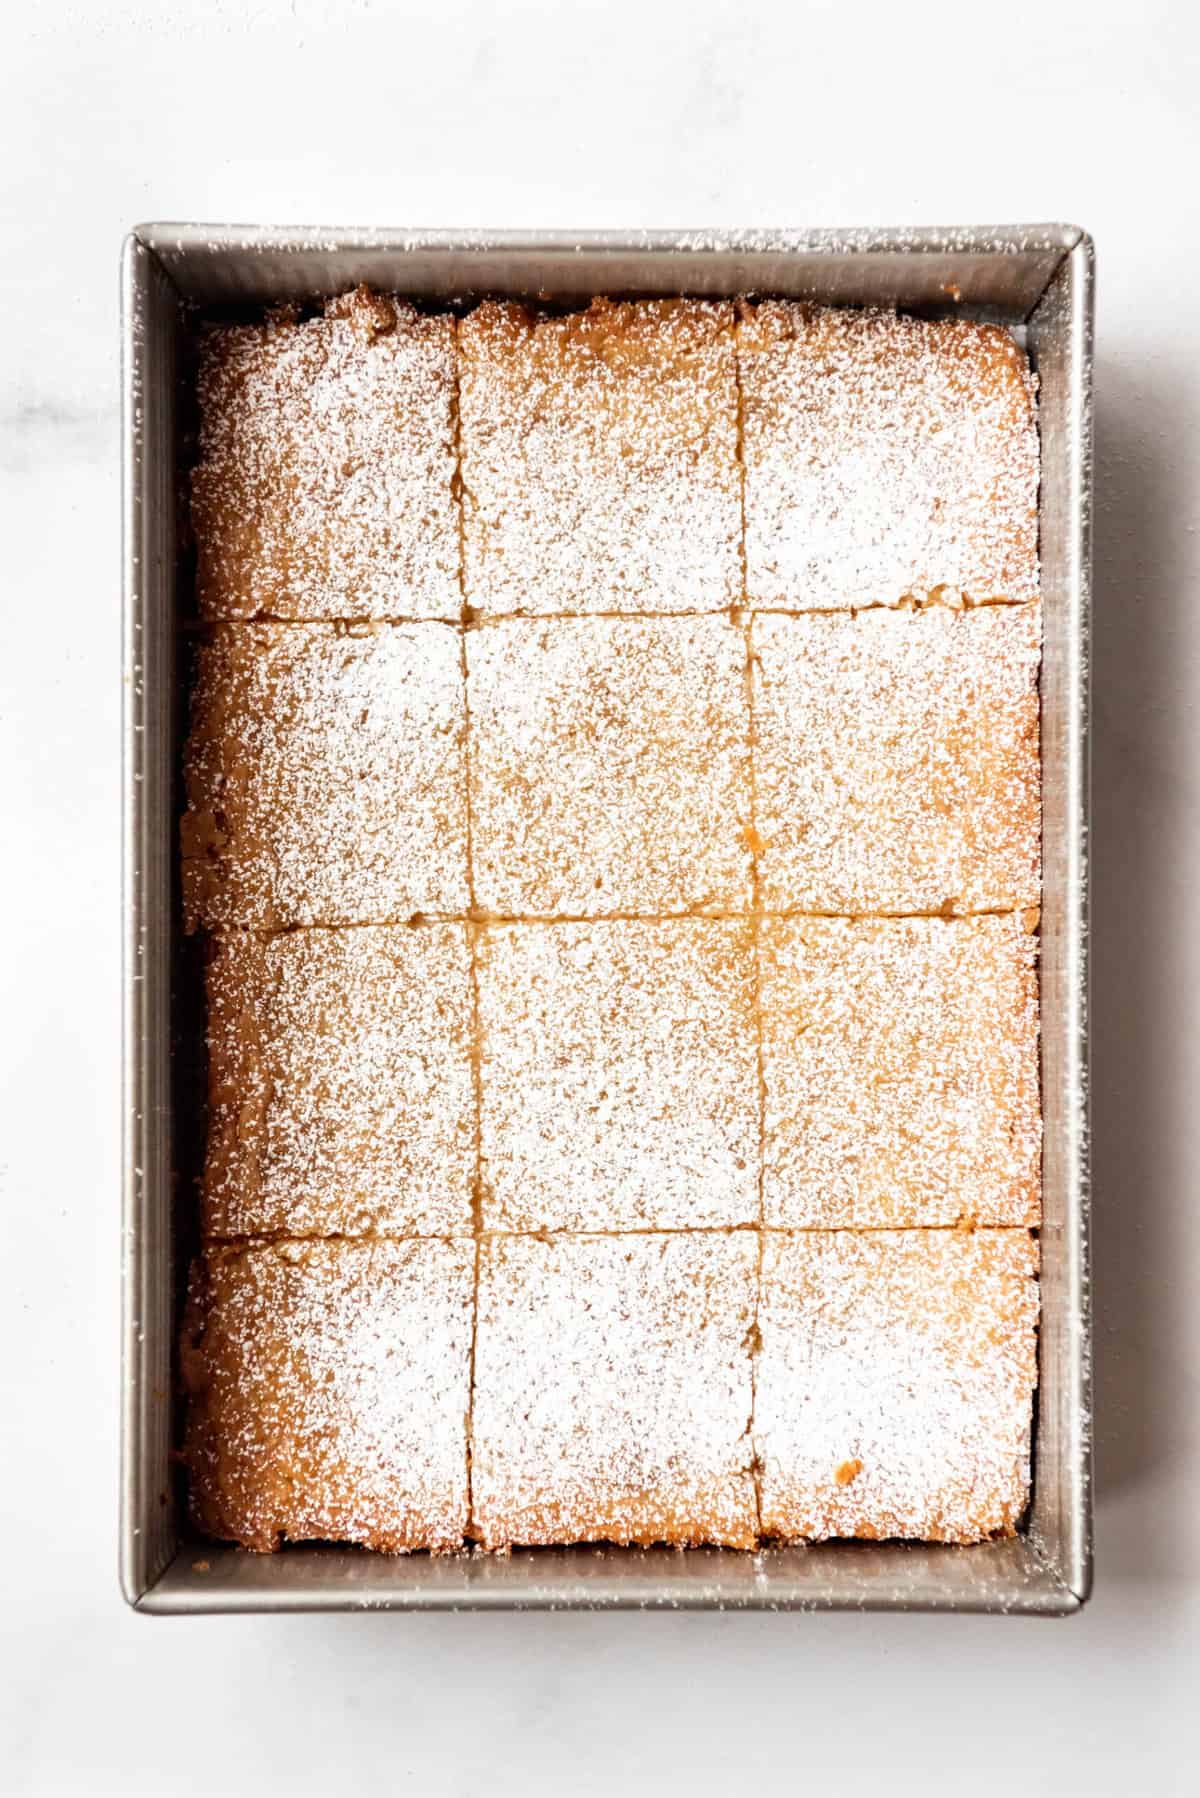 Top view of butter cake sliced into twelve servings in a baking pan.